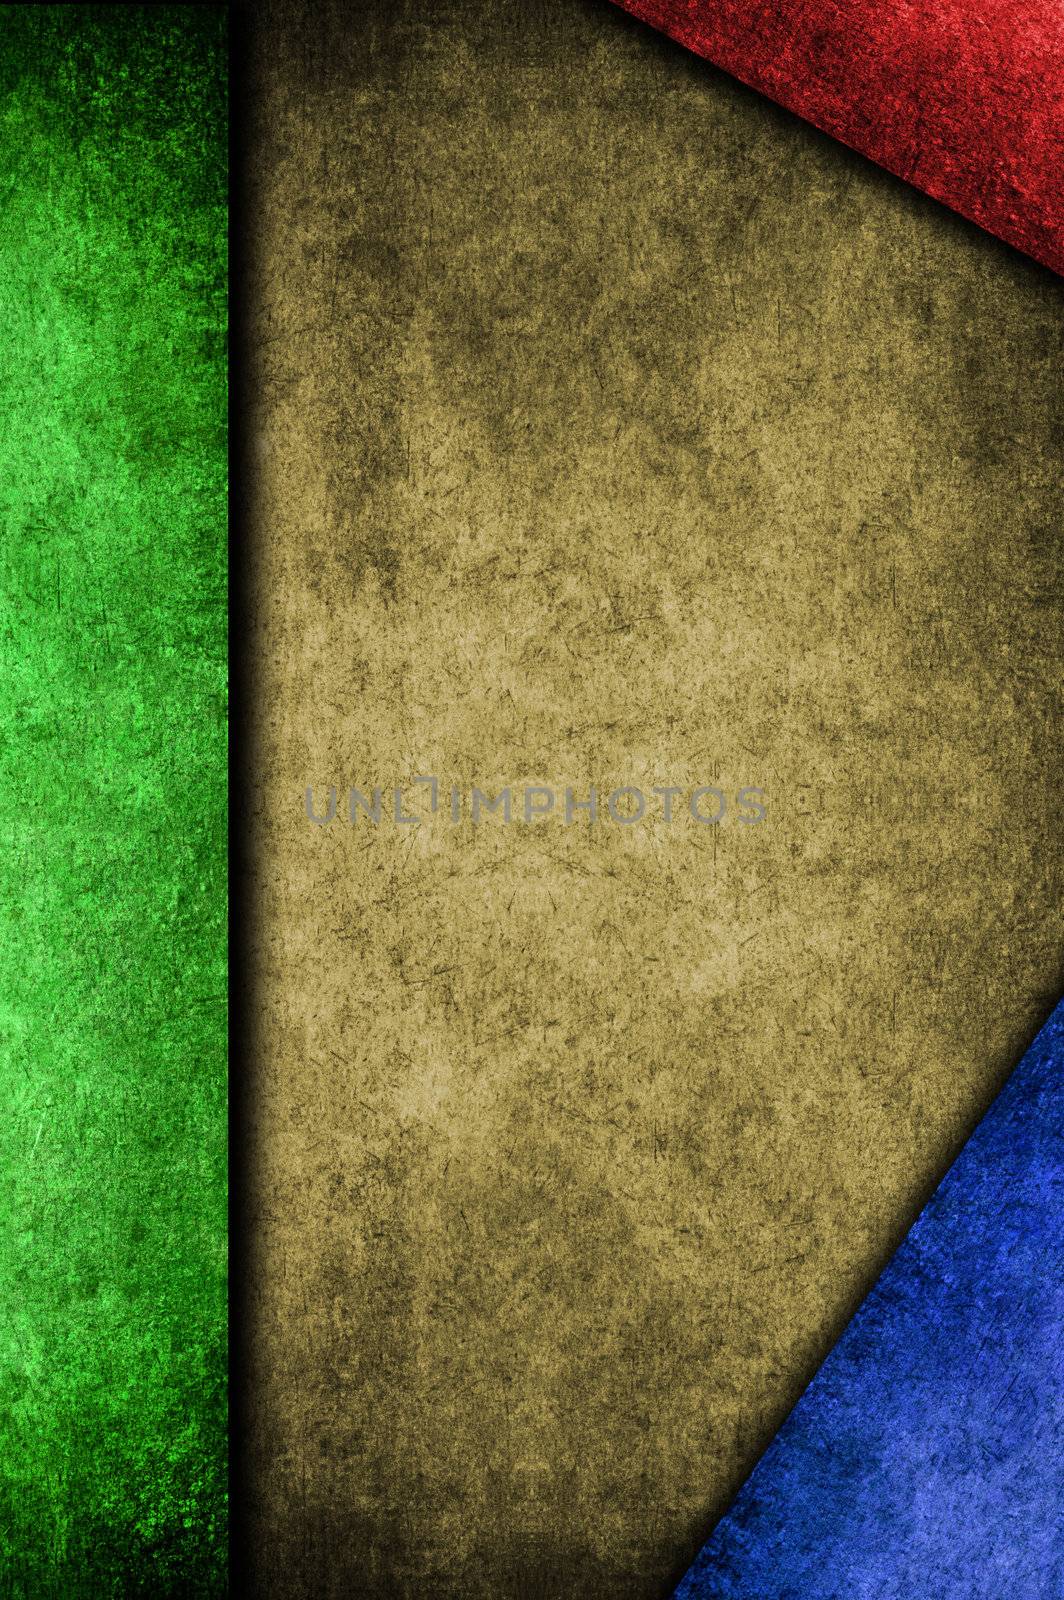 Grunge colored frame on a gray paper background